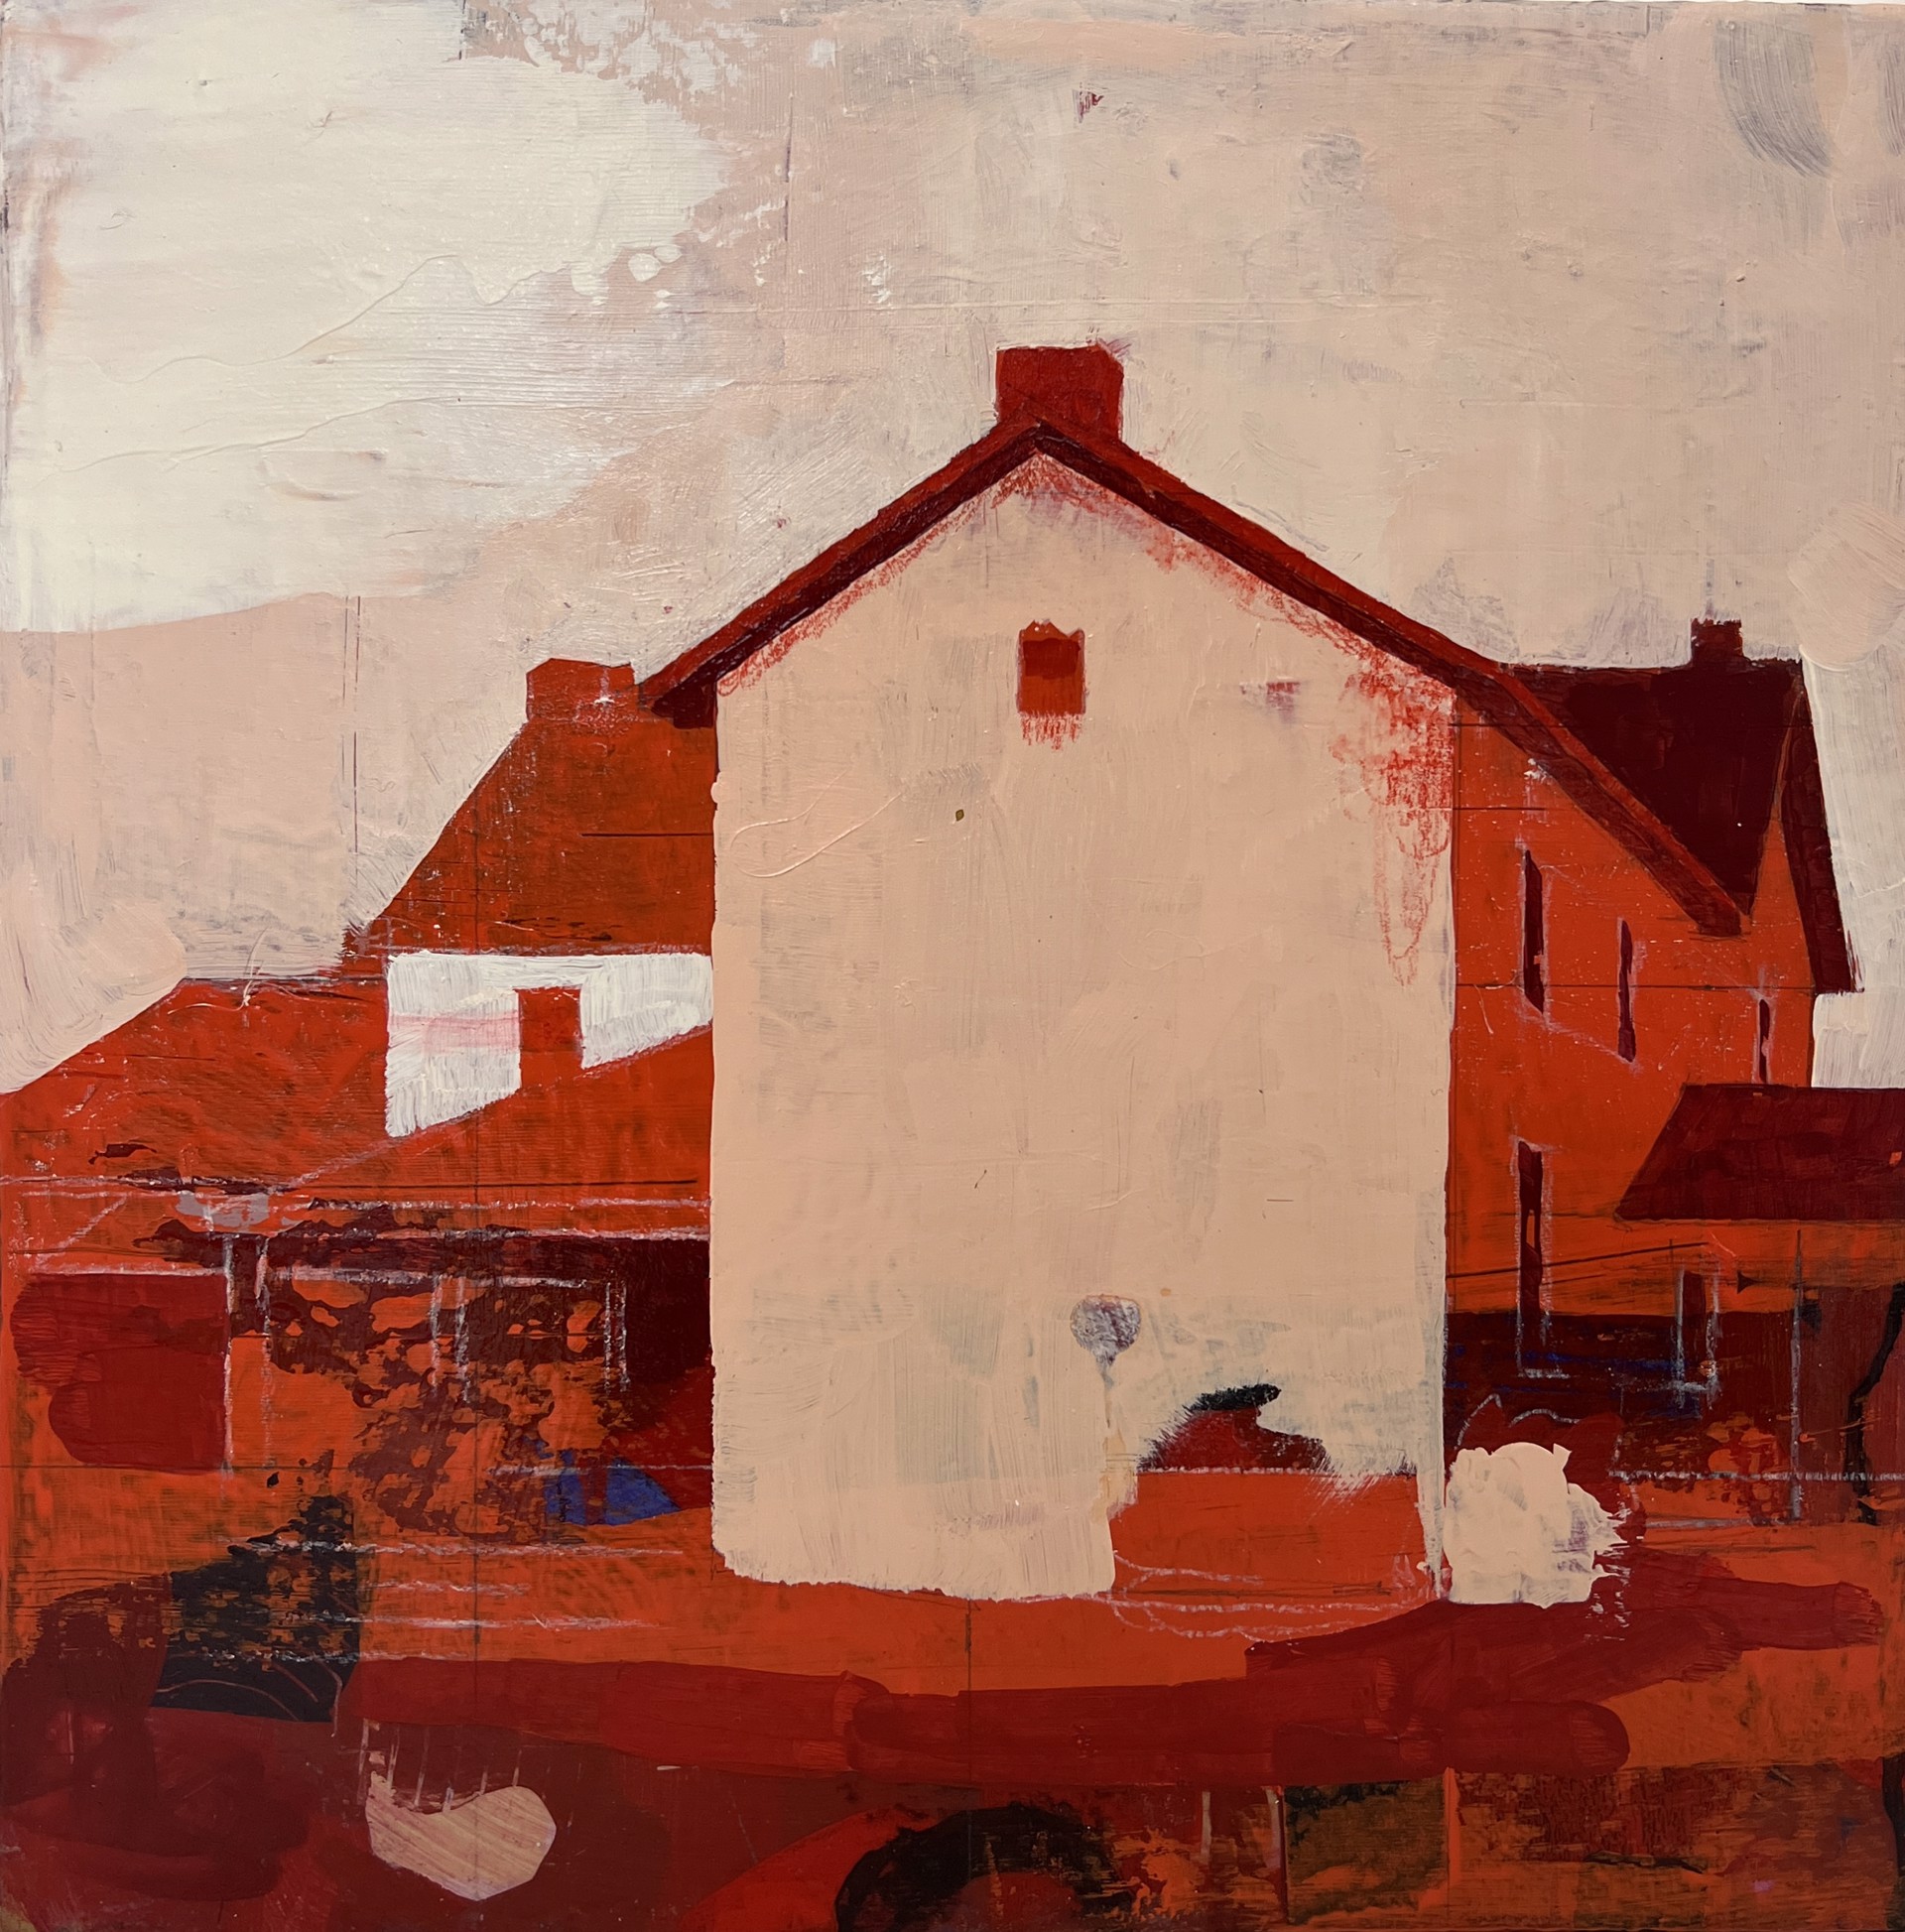 Vermillion Morning by Susan Melrath